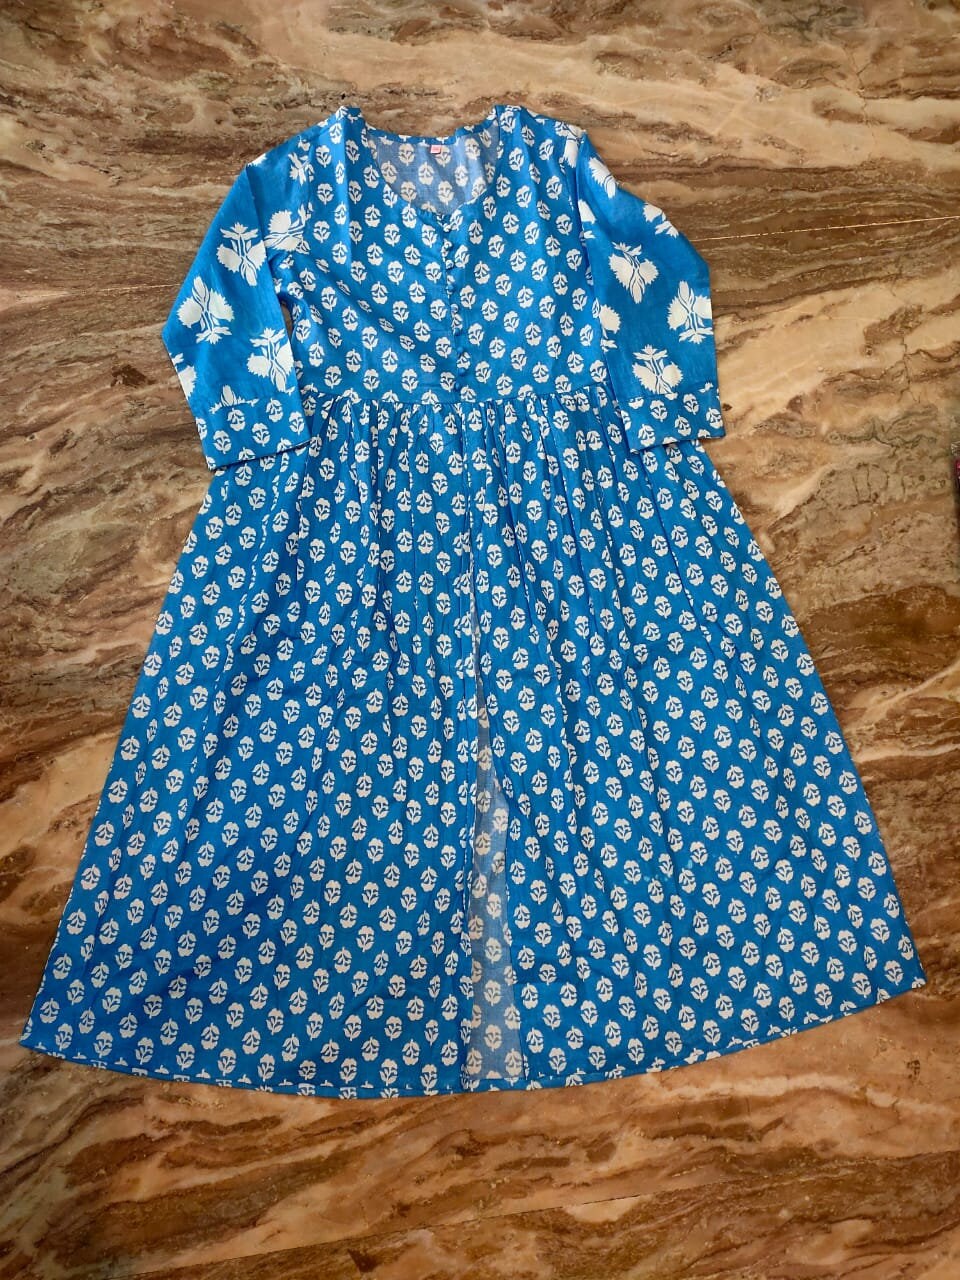 Indian Beautiful anarkali kurtis for women havvy cotton with | Etsy